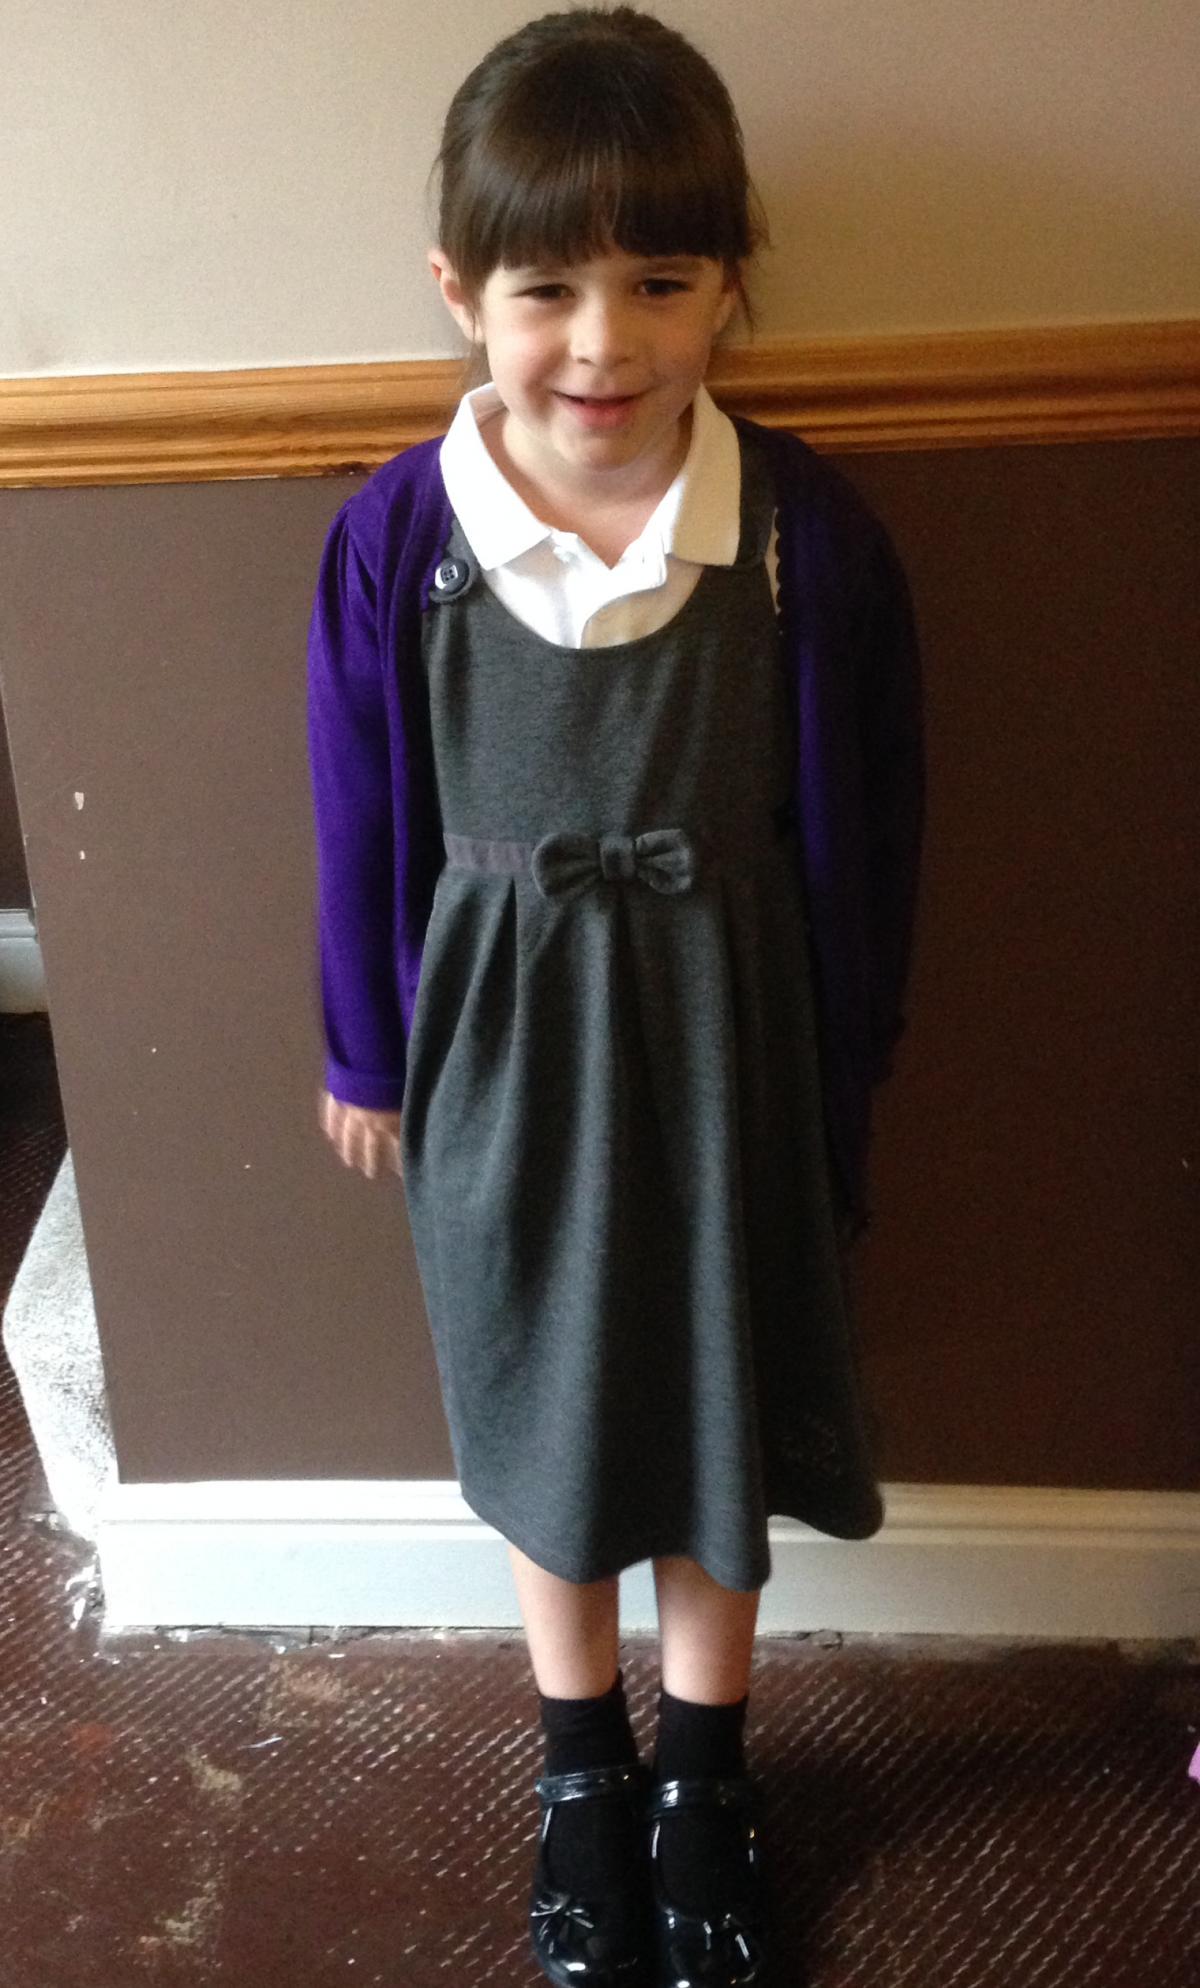 Back to School - Evie-May Martin, started Year 1 this term - Picture by Megan Martin